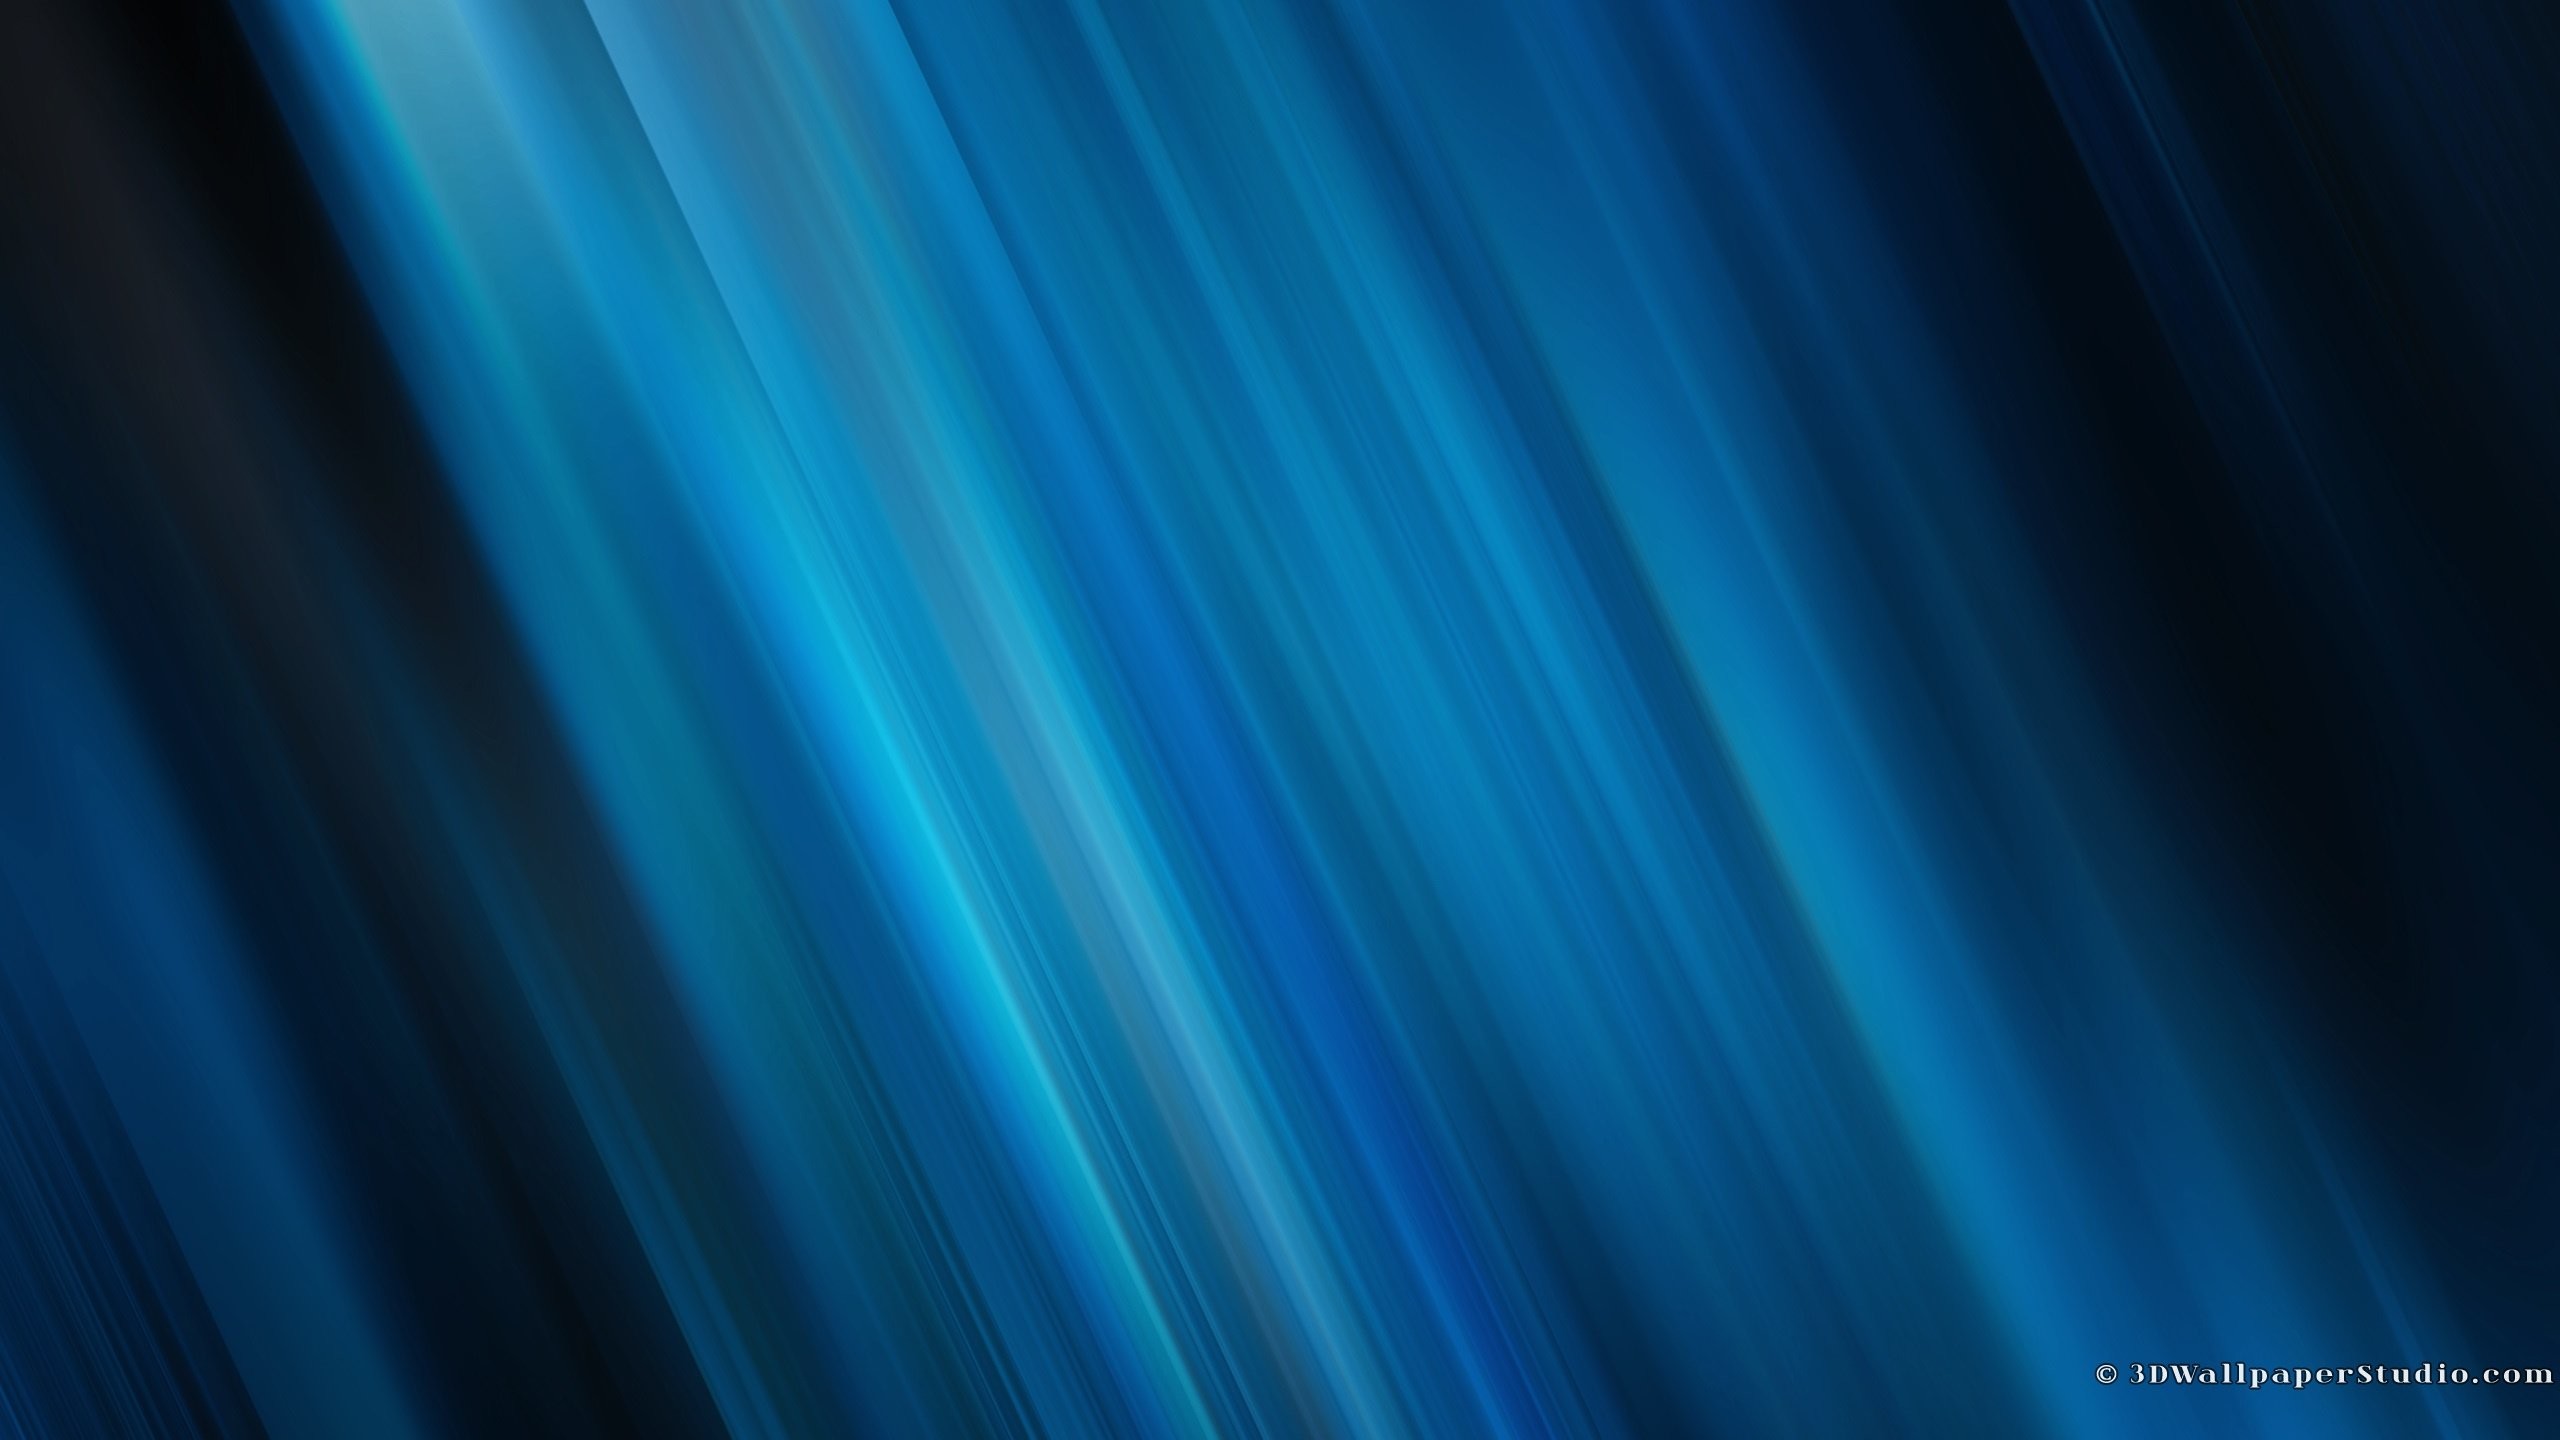 2560x1440 Cool Blue Backgrounds 338060